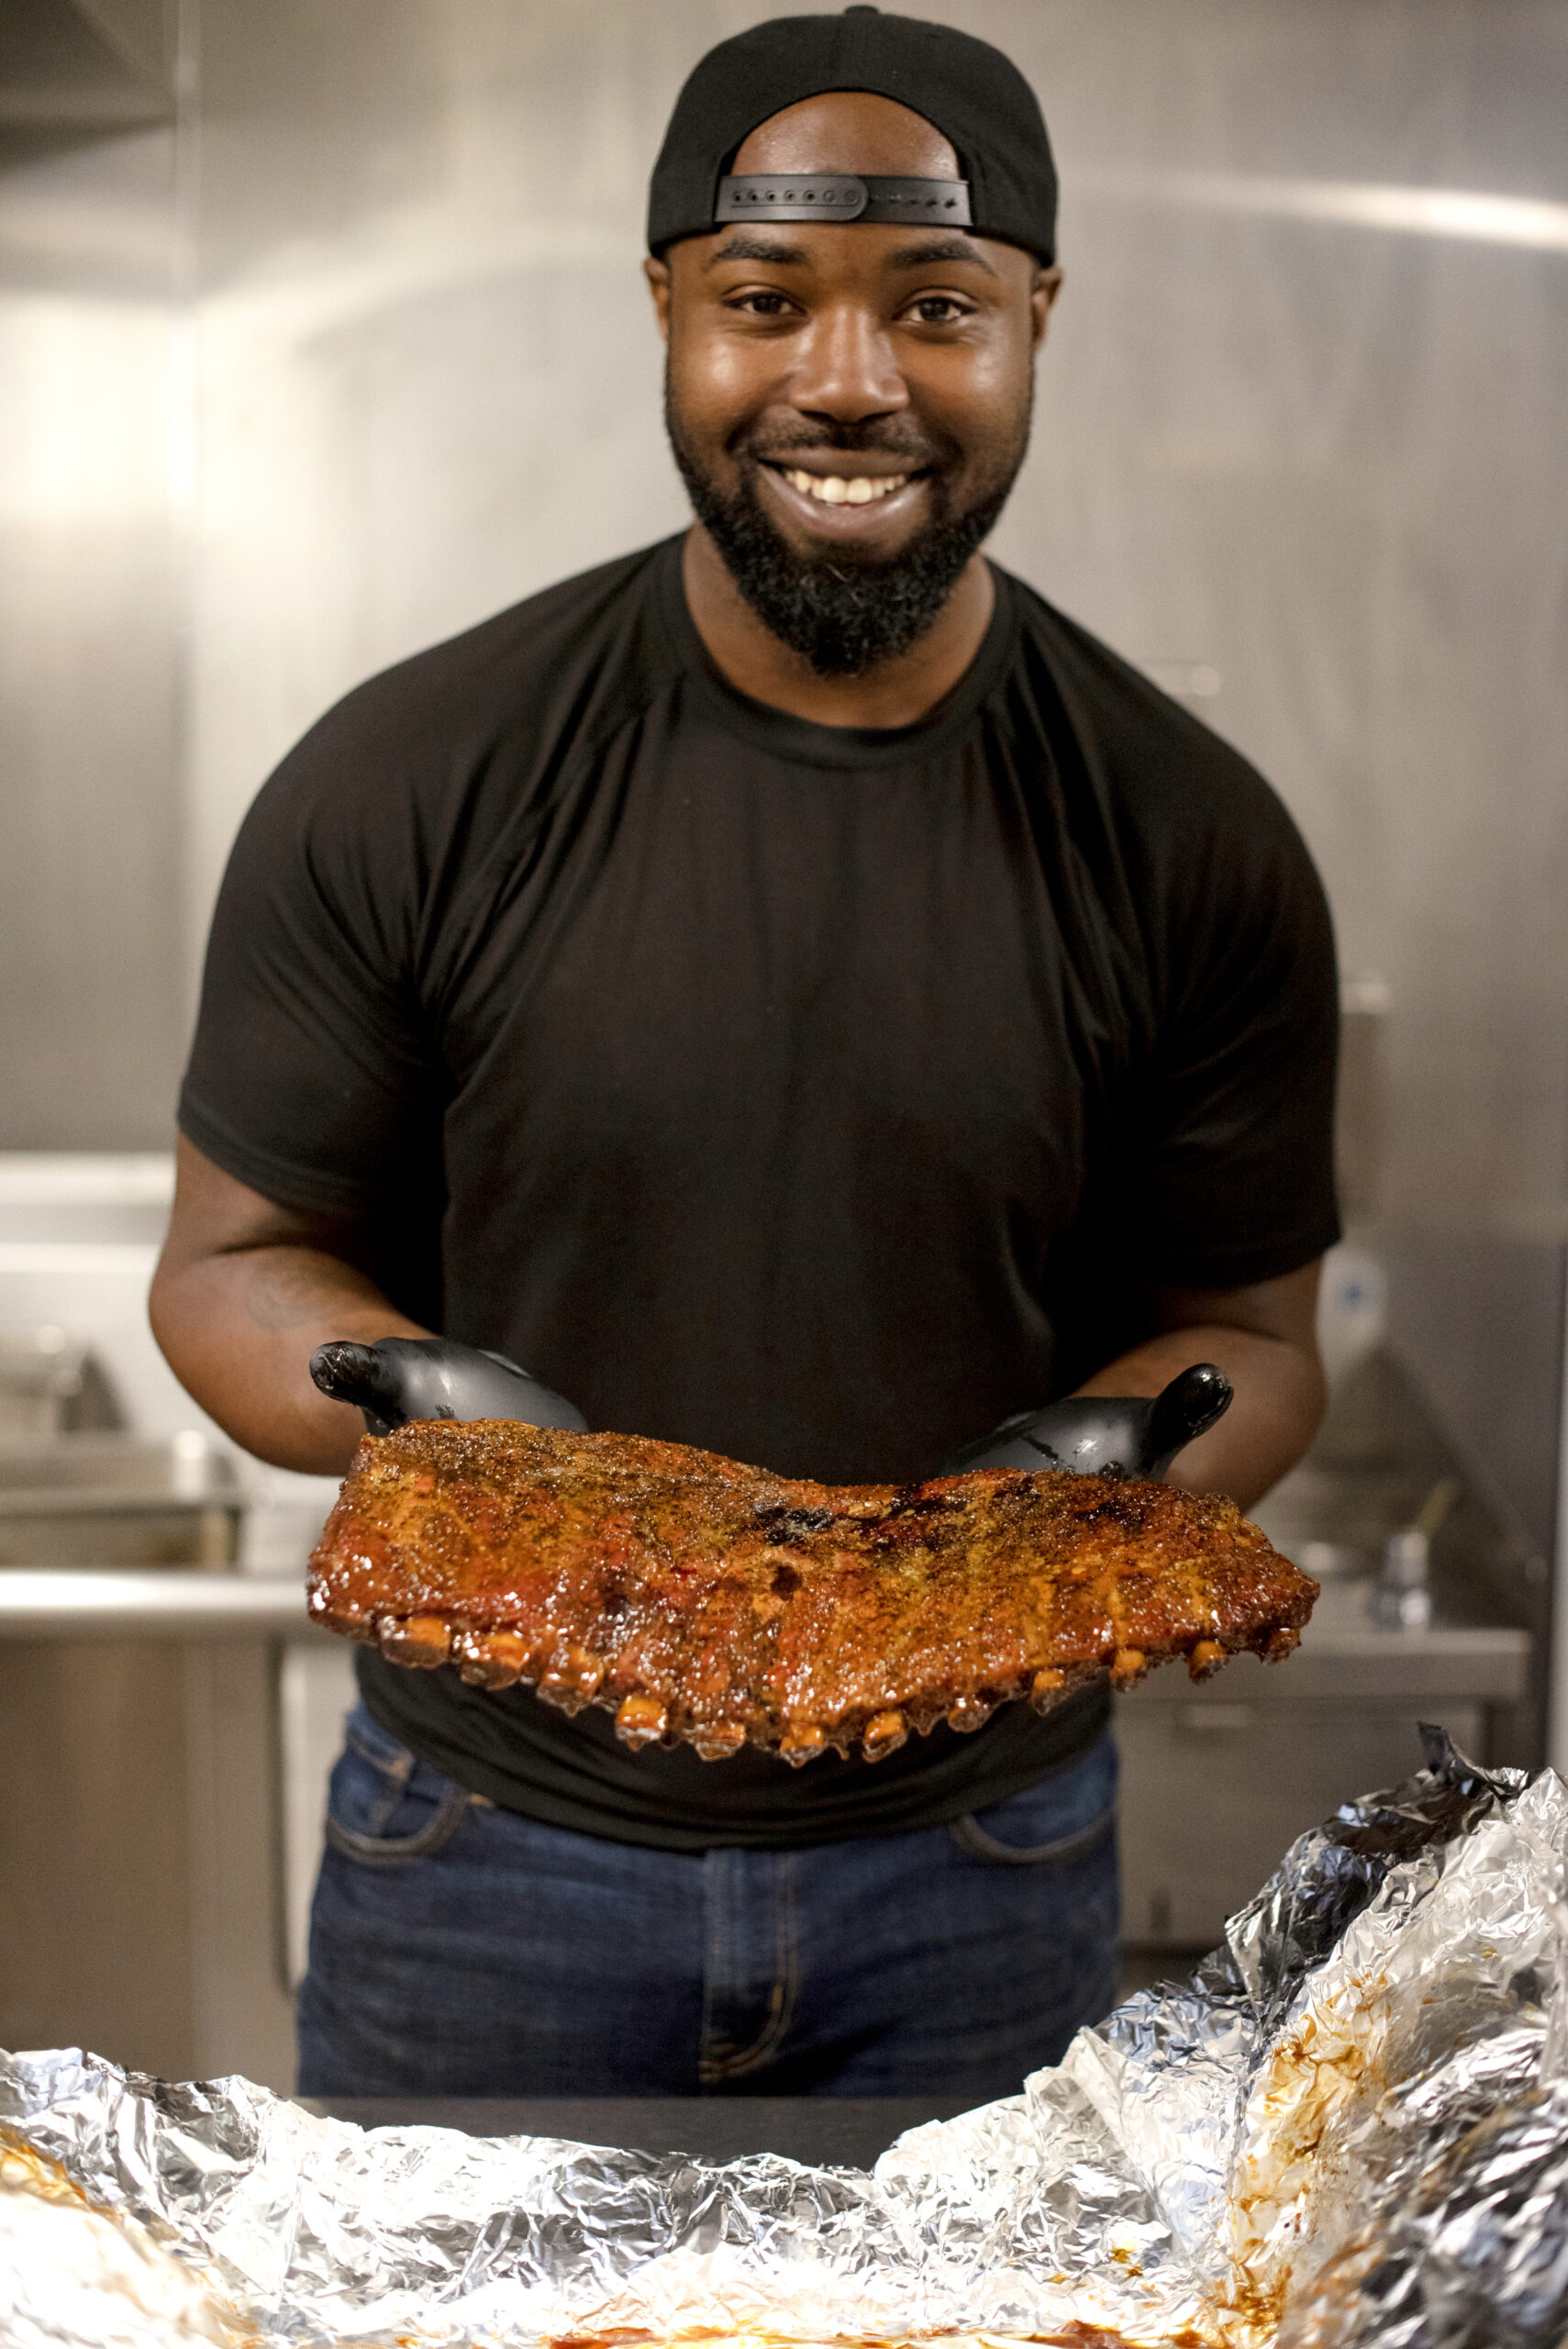 Kris Austin of Austin's Southern Smoke BBQ with some of his ribs ready for serving at Old Possum Brewing Co. in Santa Rosa, California on May 6, 2022. (Photo: Erik Castro/for Sonoma Magazine)